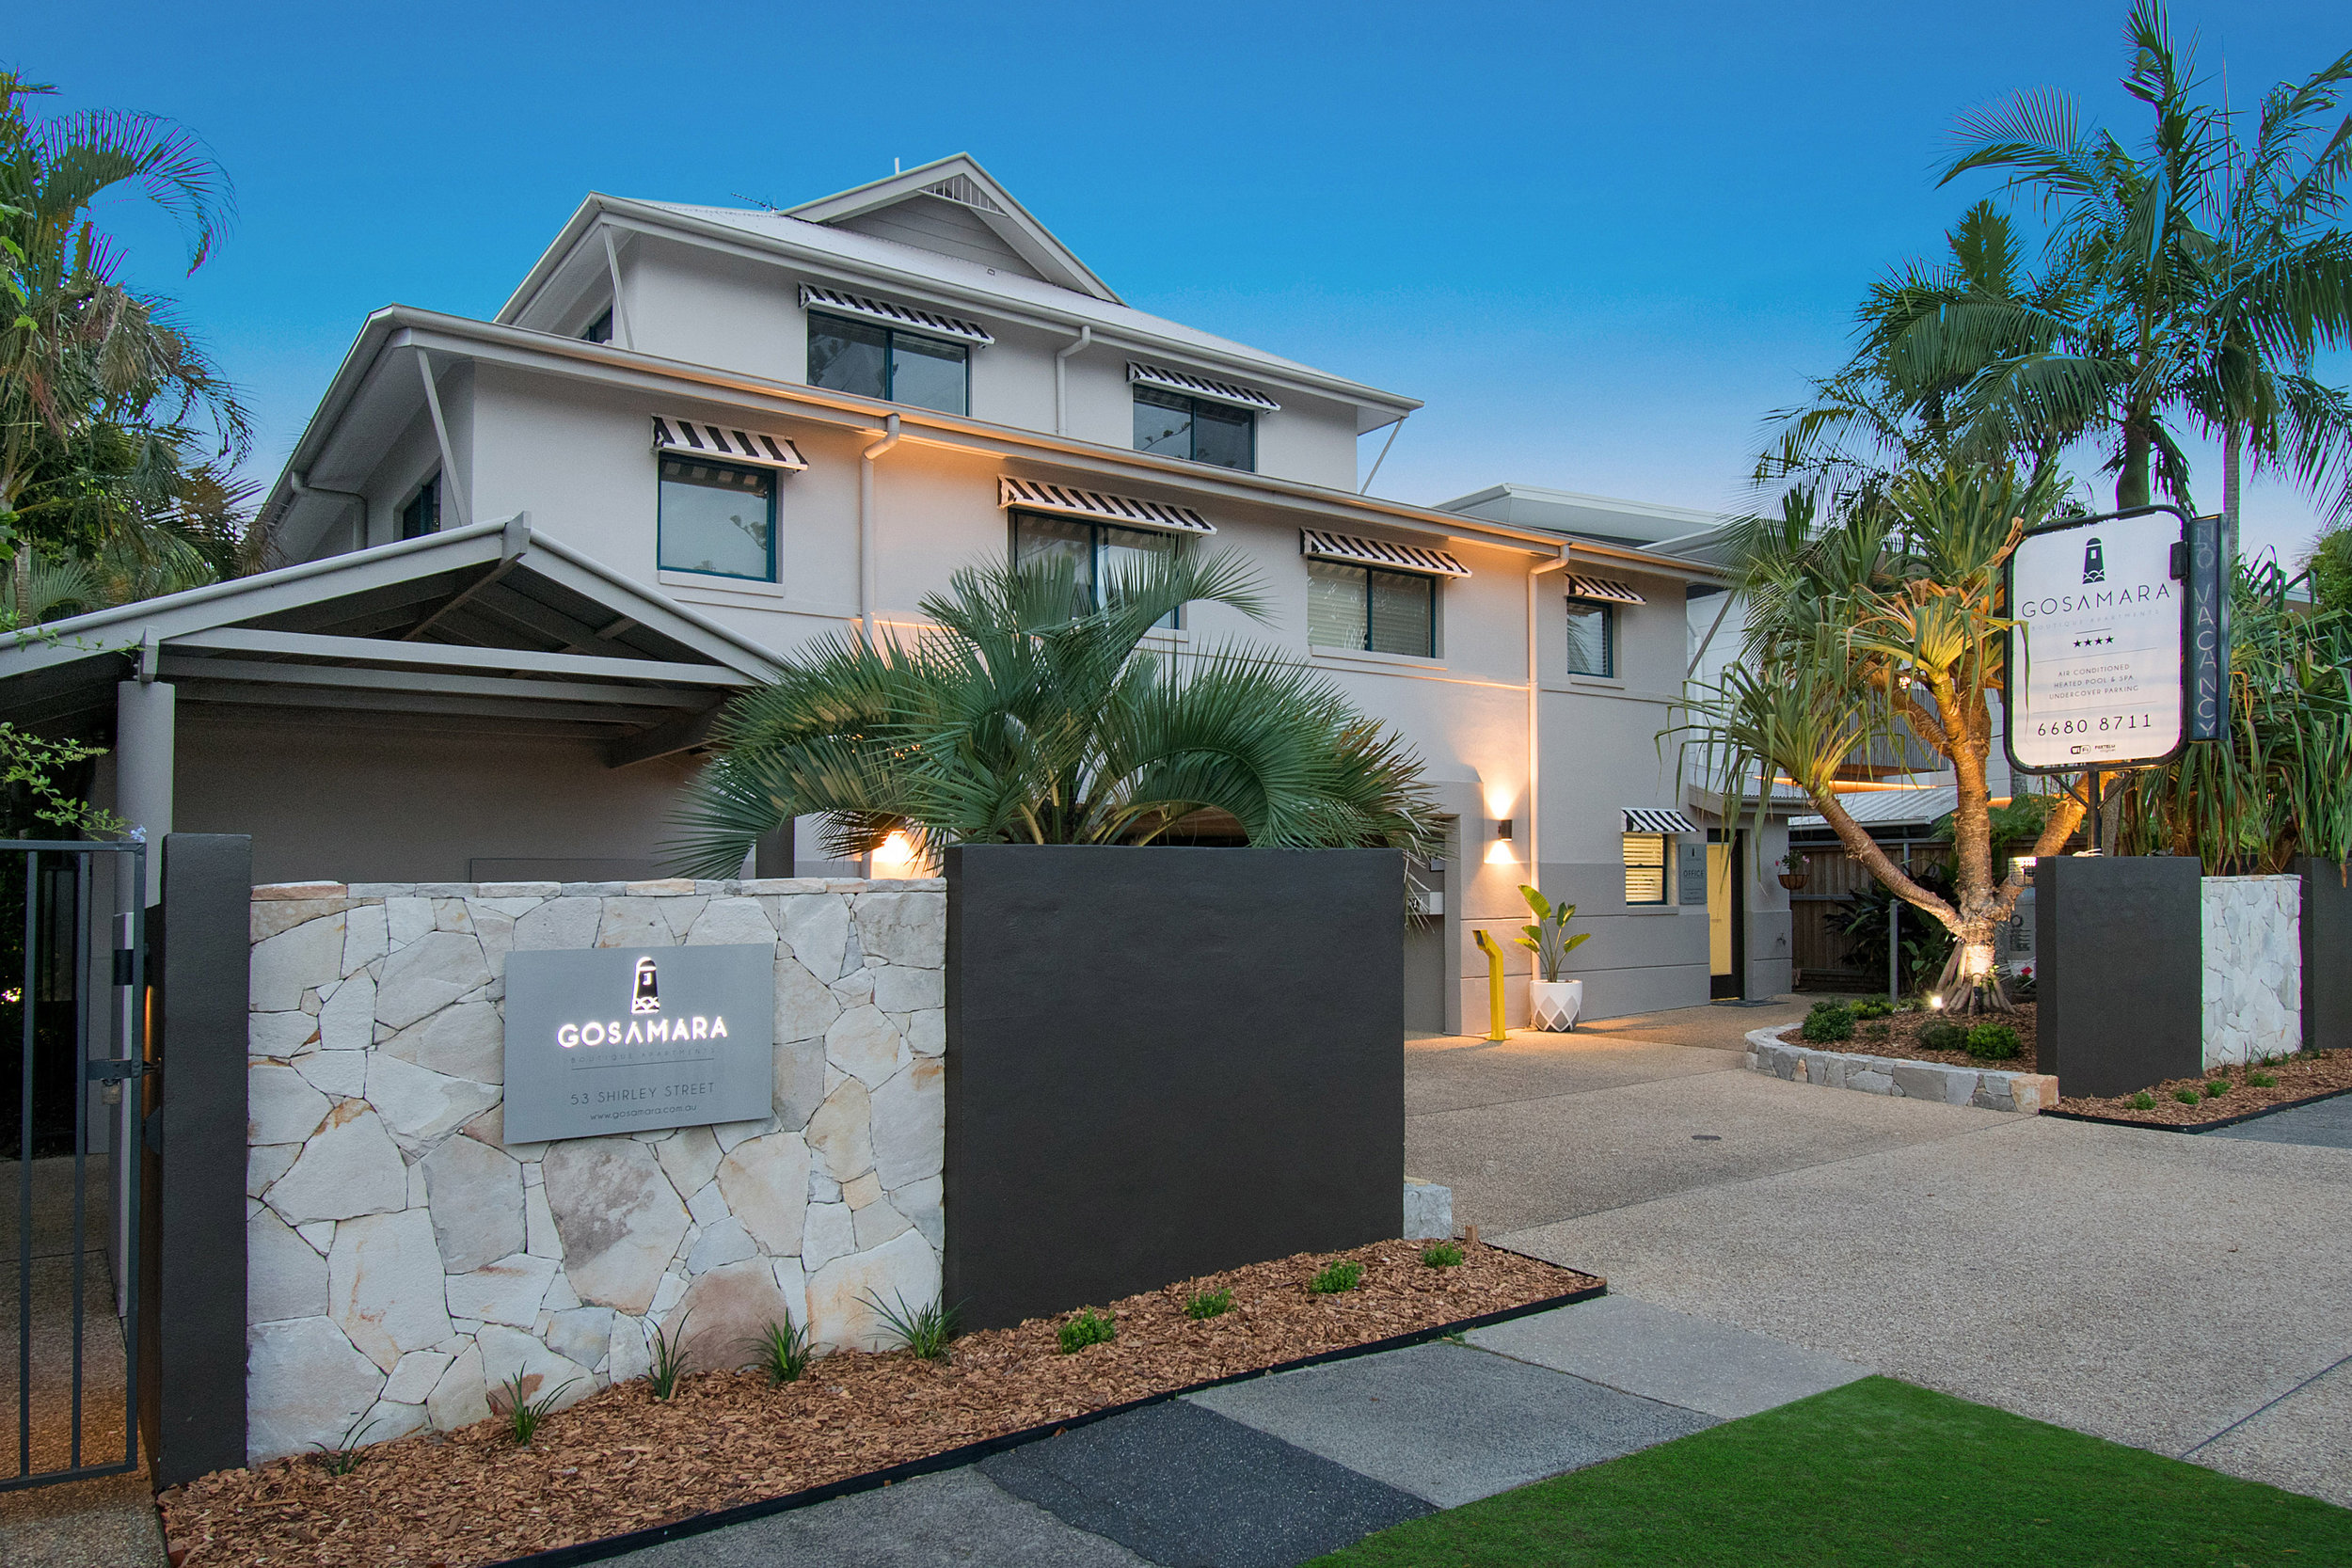  Stunning 2 &amp; 3 bedroom  self-catered accommodation in the heart of Byron Bay   Learn More  